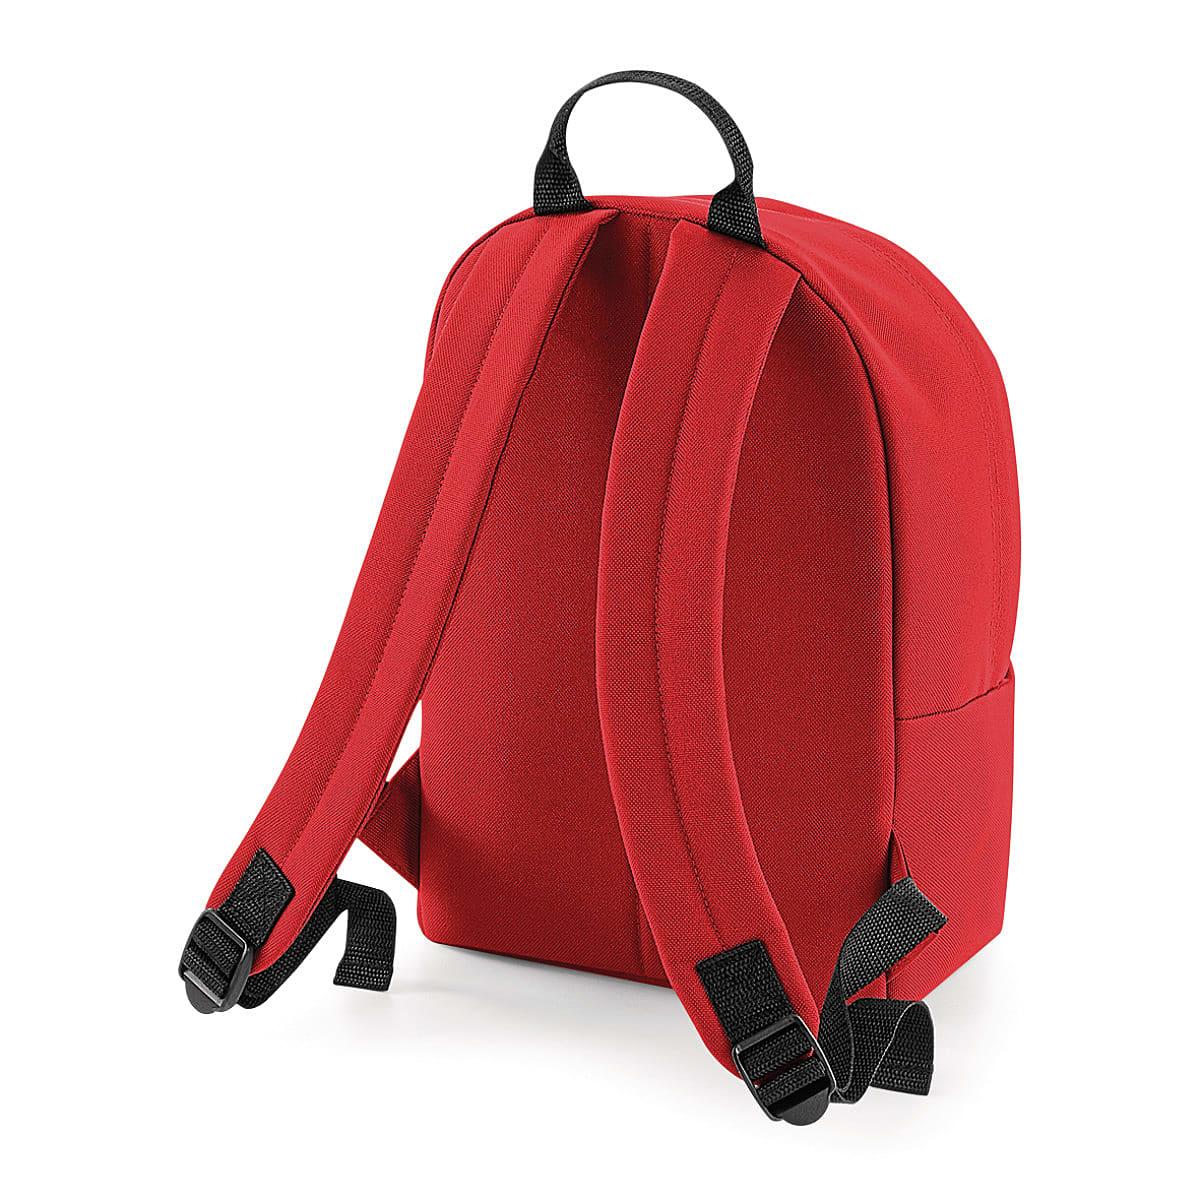 Bagbase Mini Fashion Backpack in Bright Red (Product Code: BG125S)